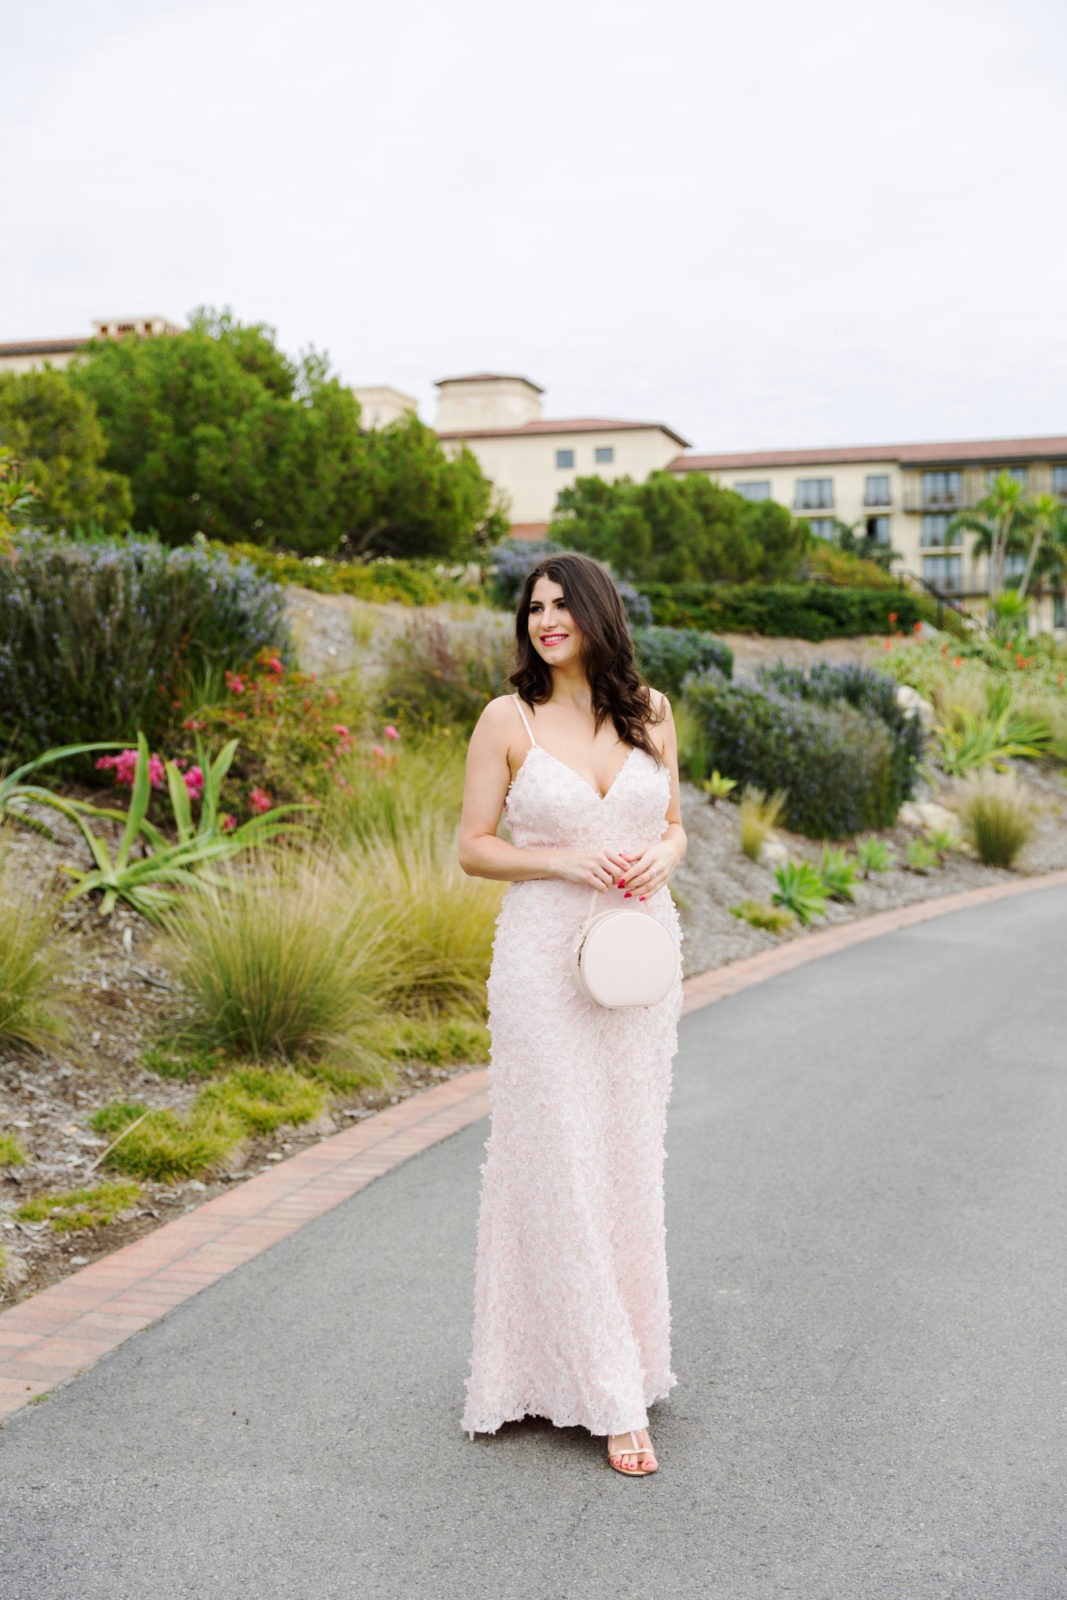 Bridesmaid Dress Ideas featured by top US fashion blogger Laura Lily; Image of a woman wearing Eliza J Dress, Asos Veil, Icing Earrings + headband, Lulu's heels and The Daily Edit bag.